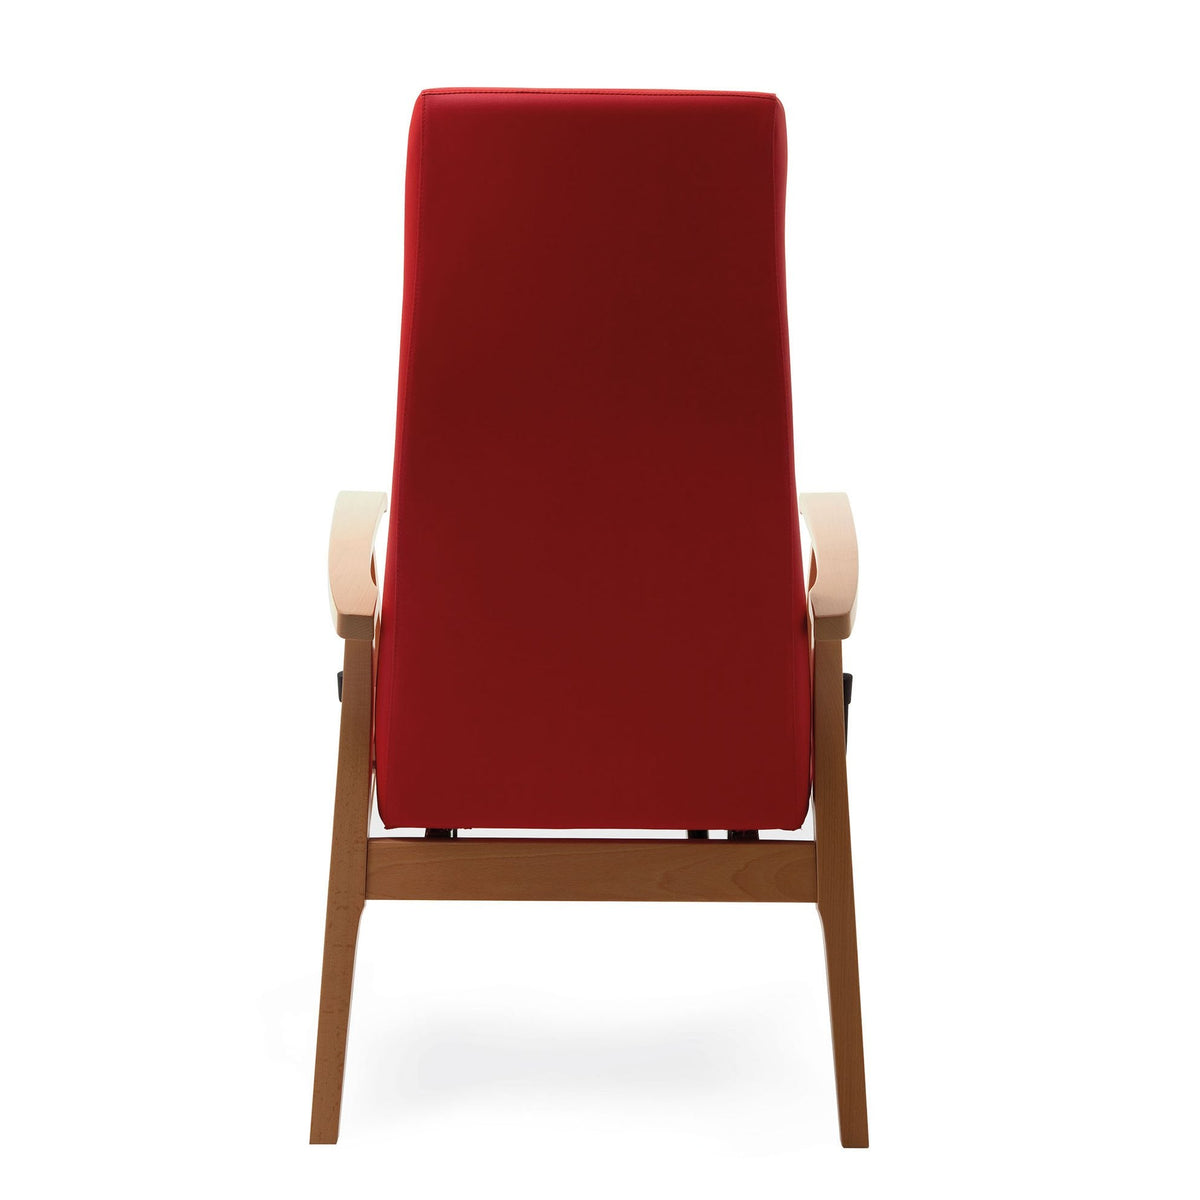 Aero 52-63/3RG Lounge Chair-Piaval-Contract Furniture Store